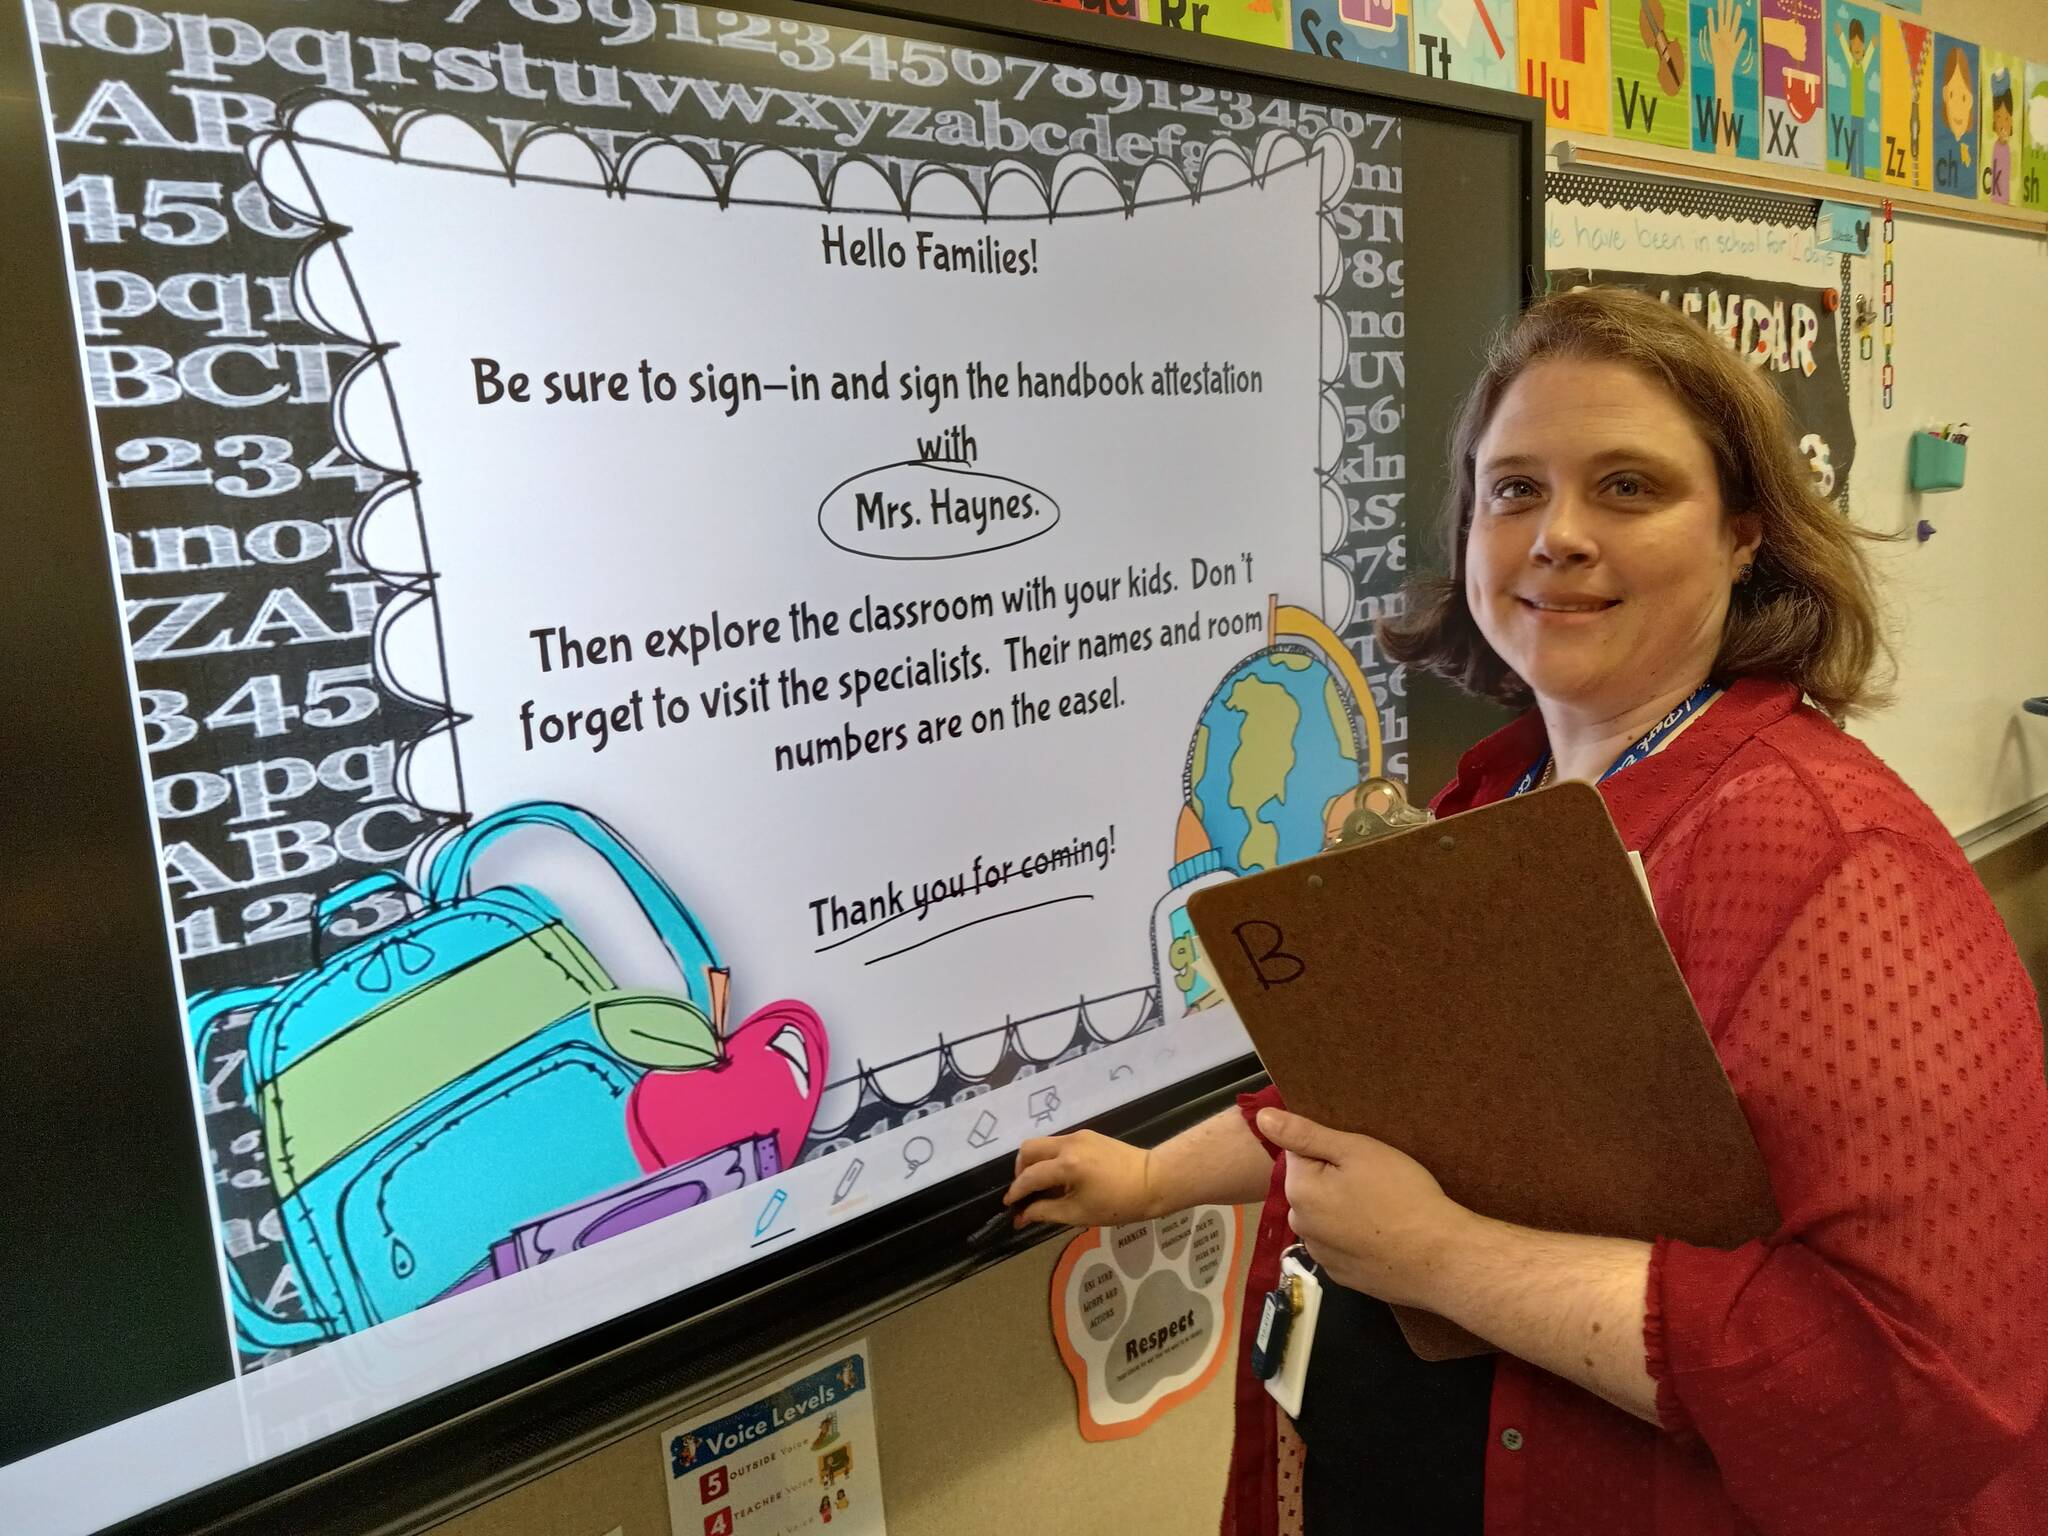 ROBERT WHALE, Auburn Reporter
Fourth-grade teacher Jennie Haynes explains her electronic display, something of a replacement for the chalkboards of yesteryear.